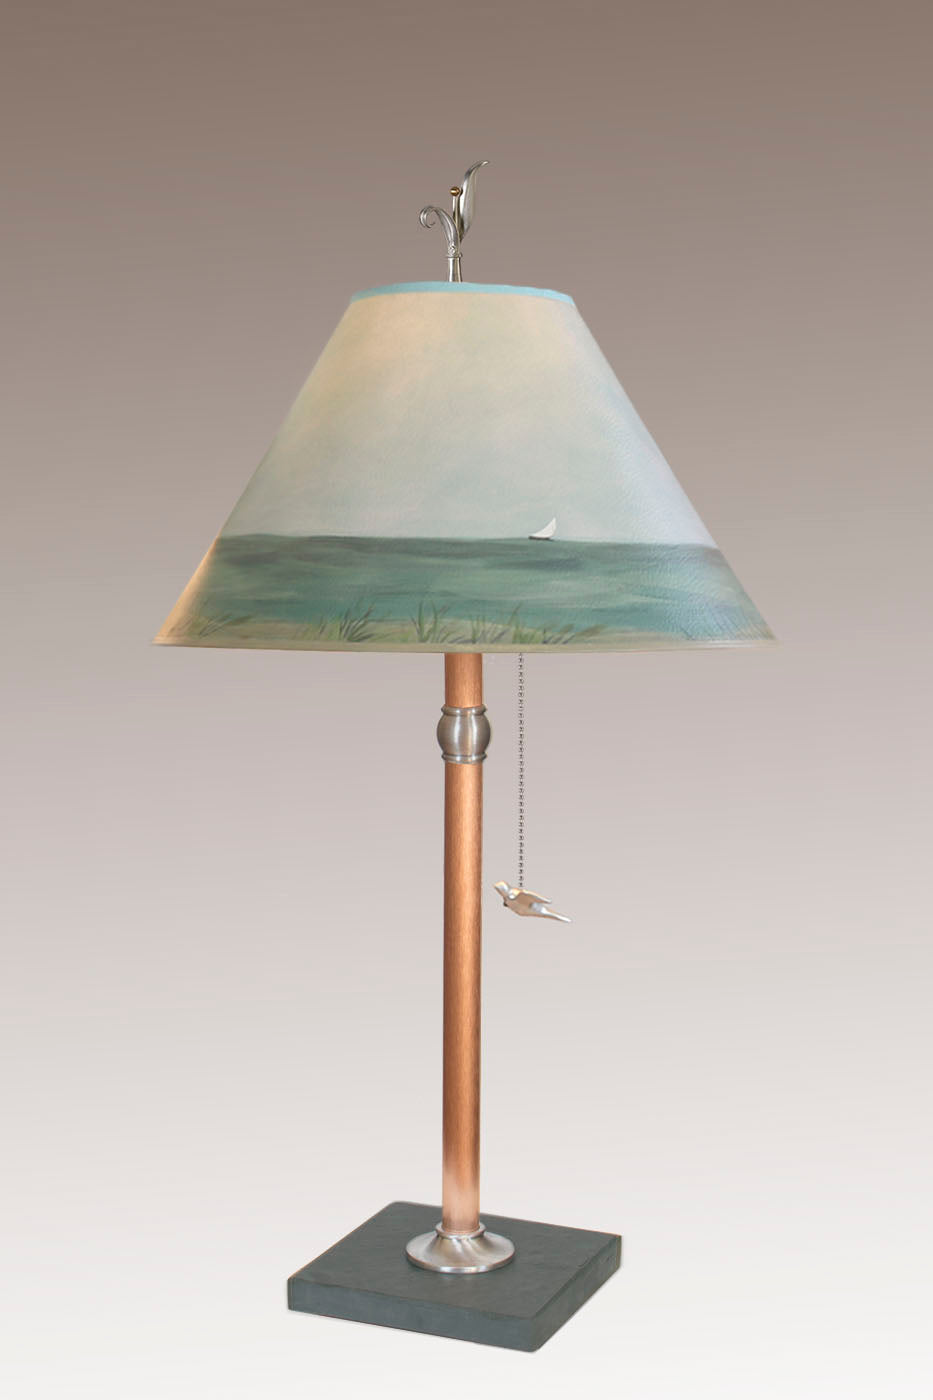 Janna Ugone &amp; Co Table Lamps Copper Table Lamp with Medium Conical Shade in Shore